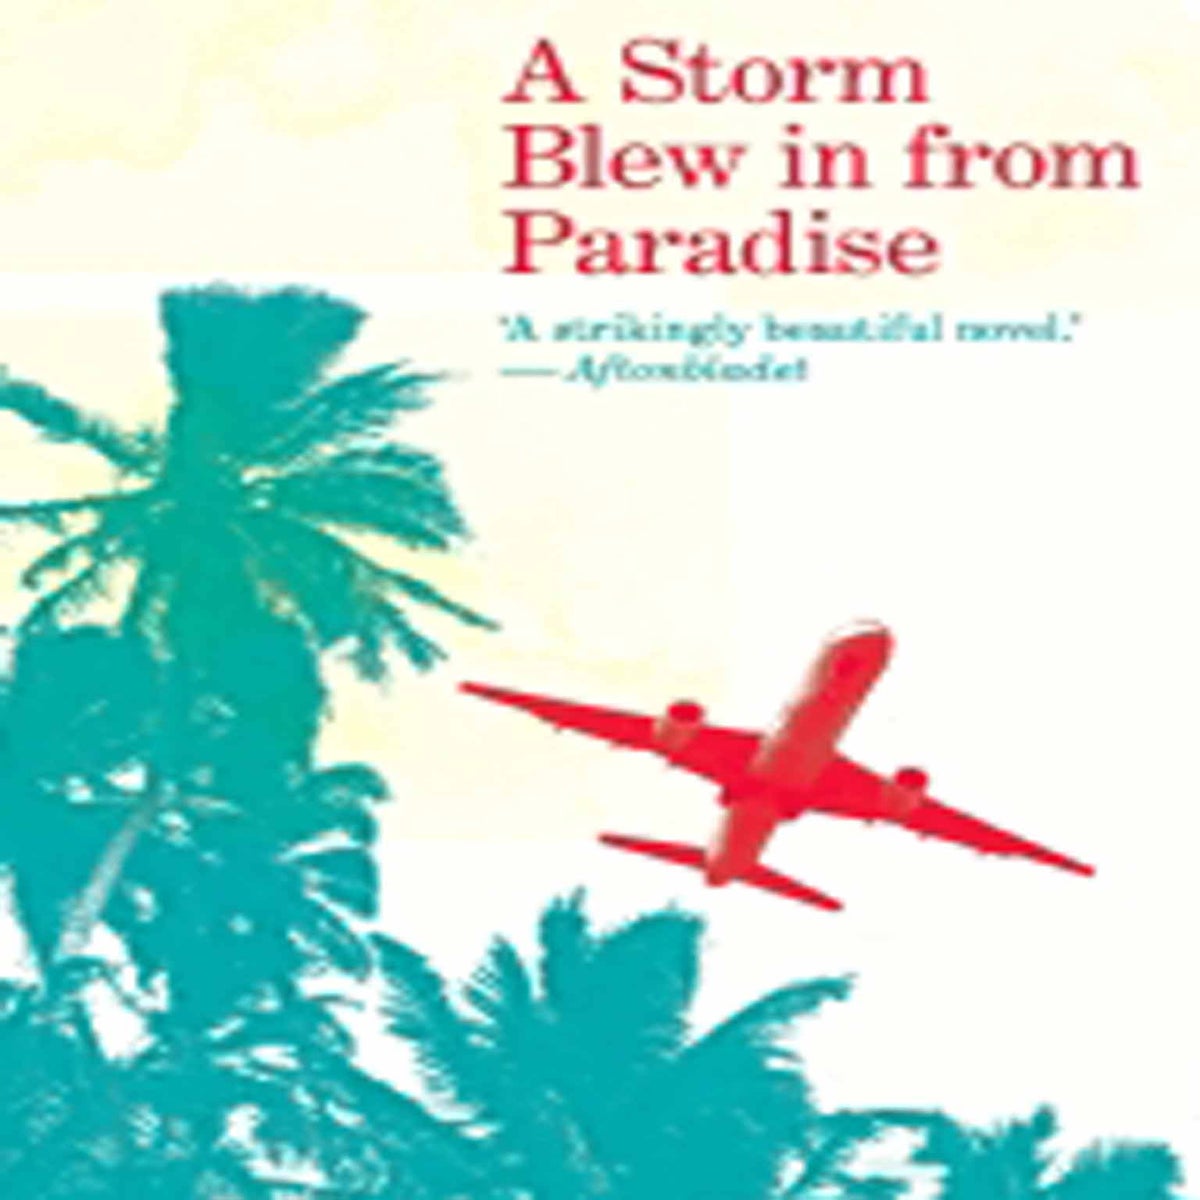 A Storm Blew In From Paradise (English Edition) - eBooks em Inglês